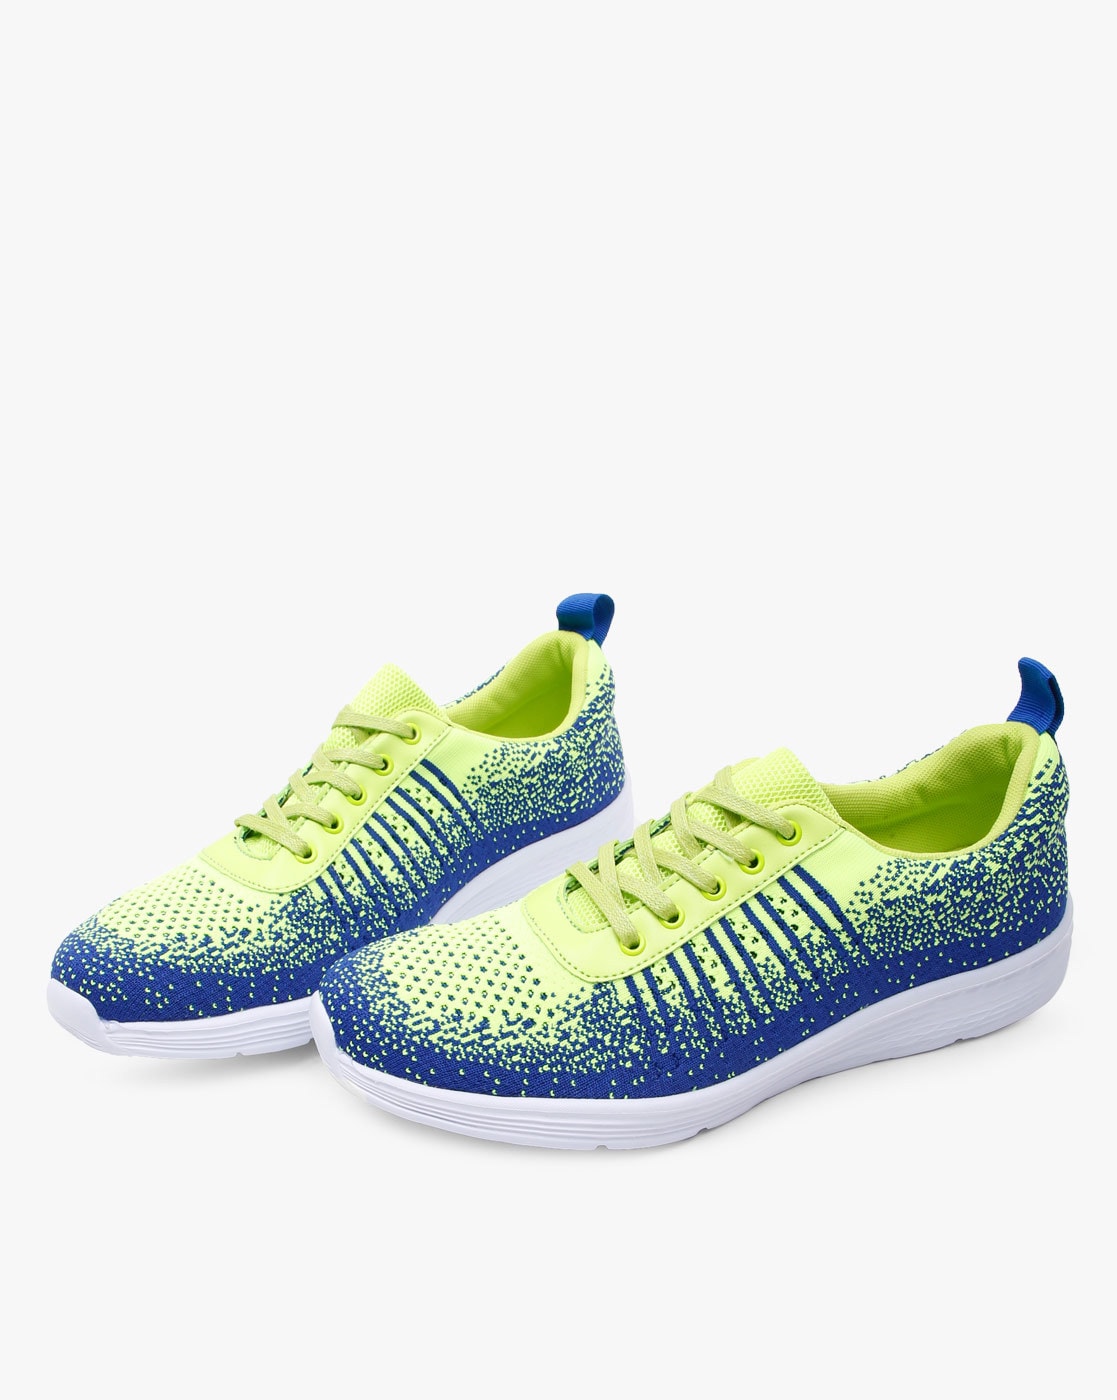 neon green shoes mens